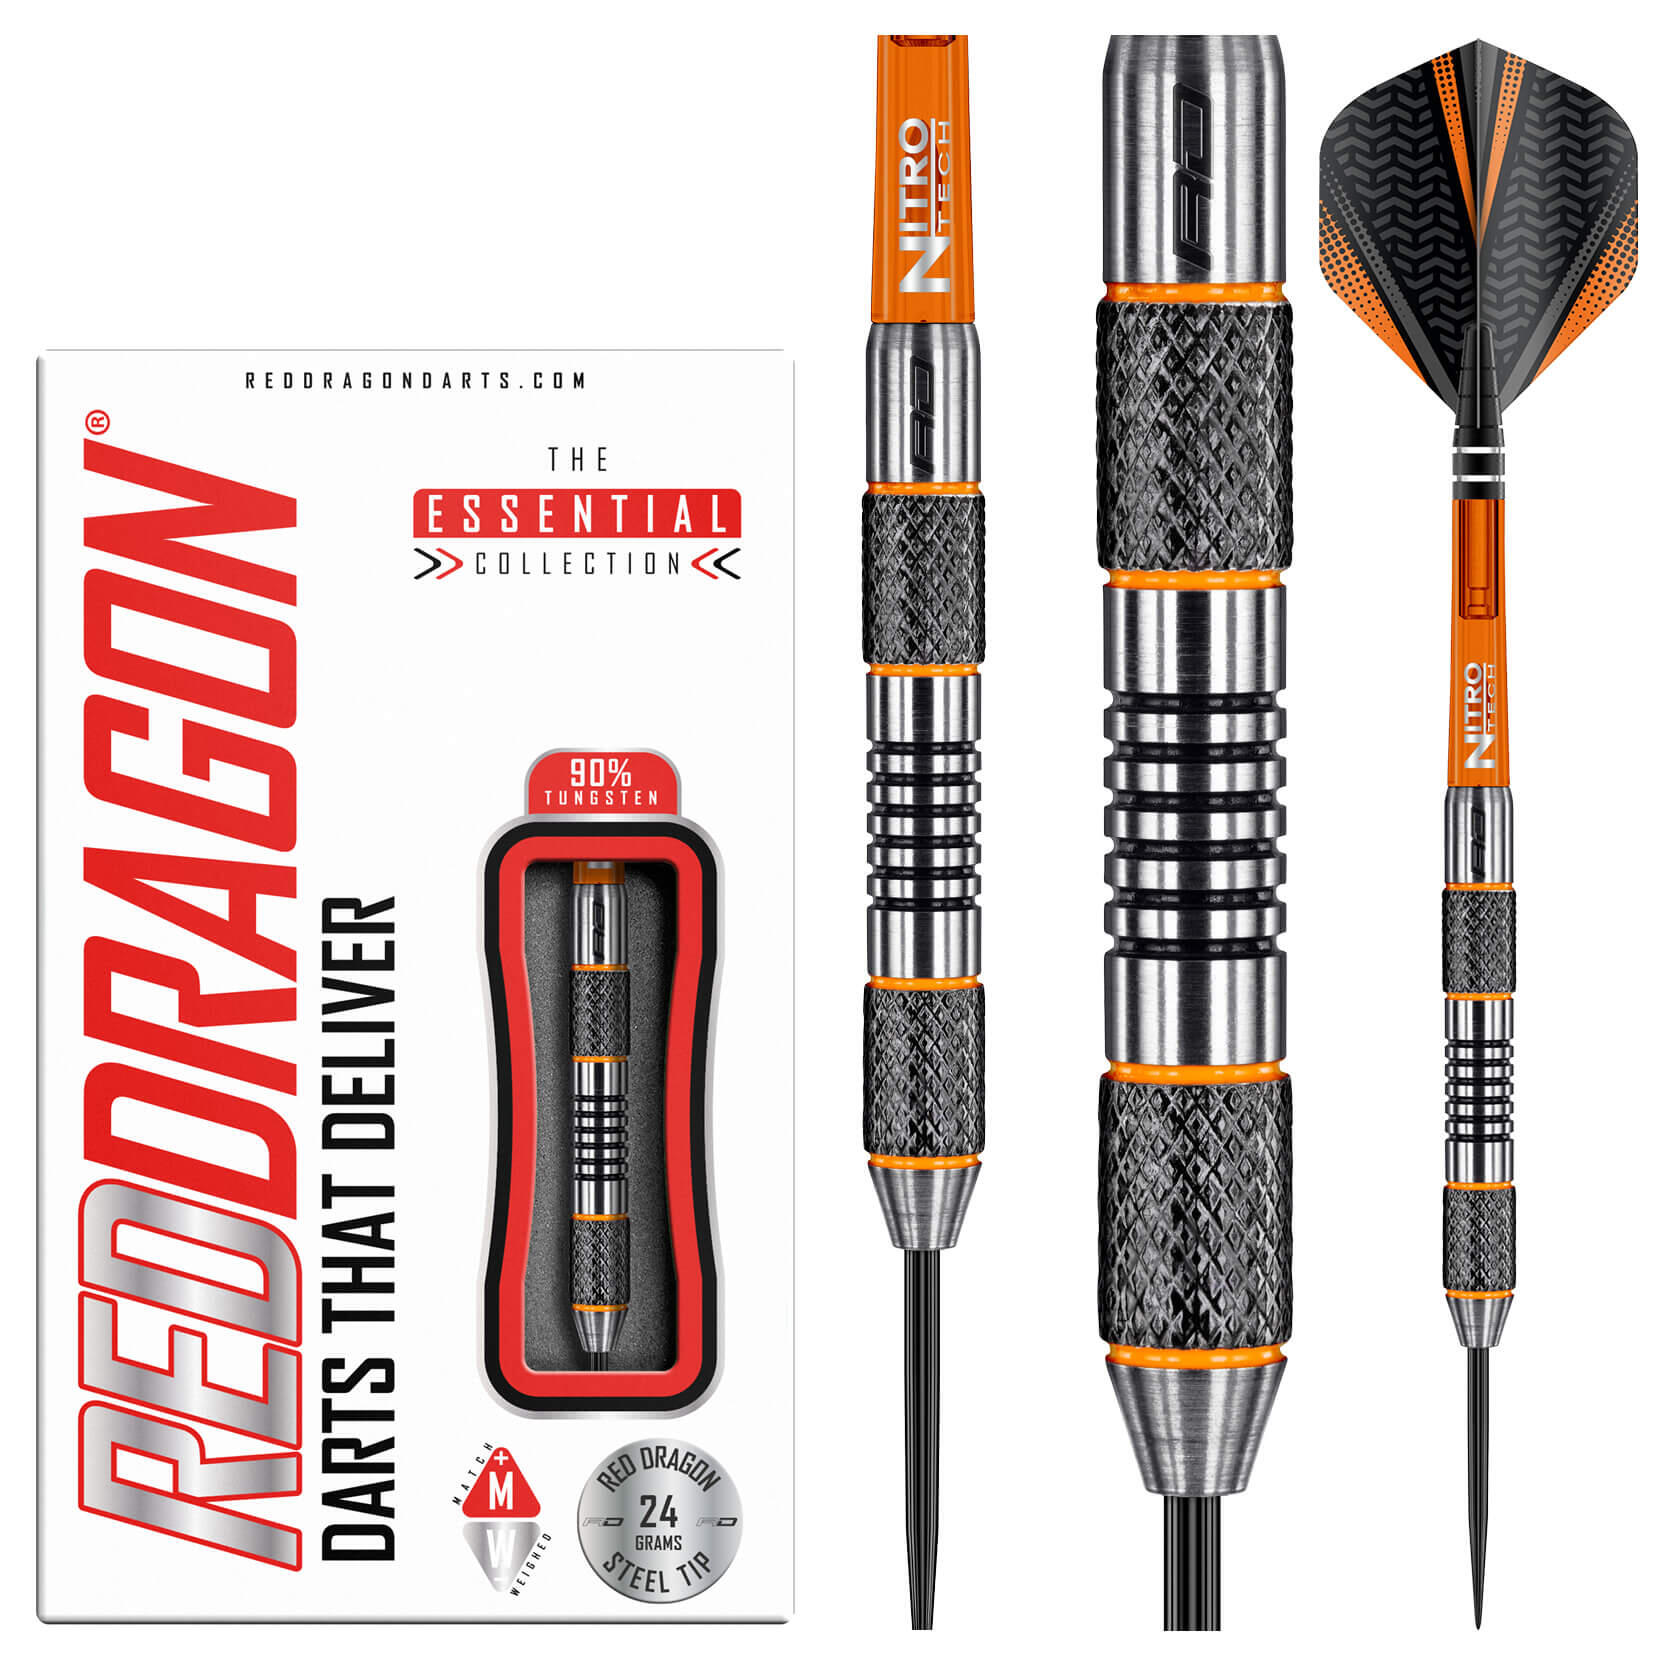 RED DRAGON DARTS Amberjack 5: 24g Tungsten Darts Set with Flights and Stems